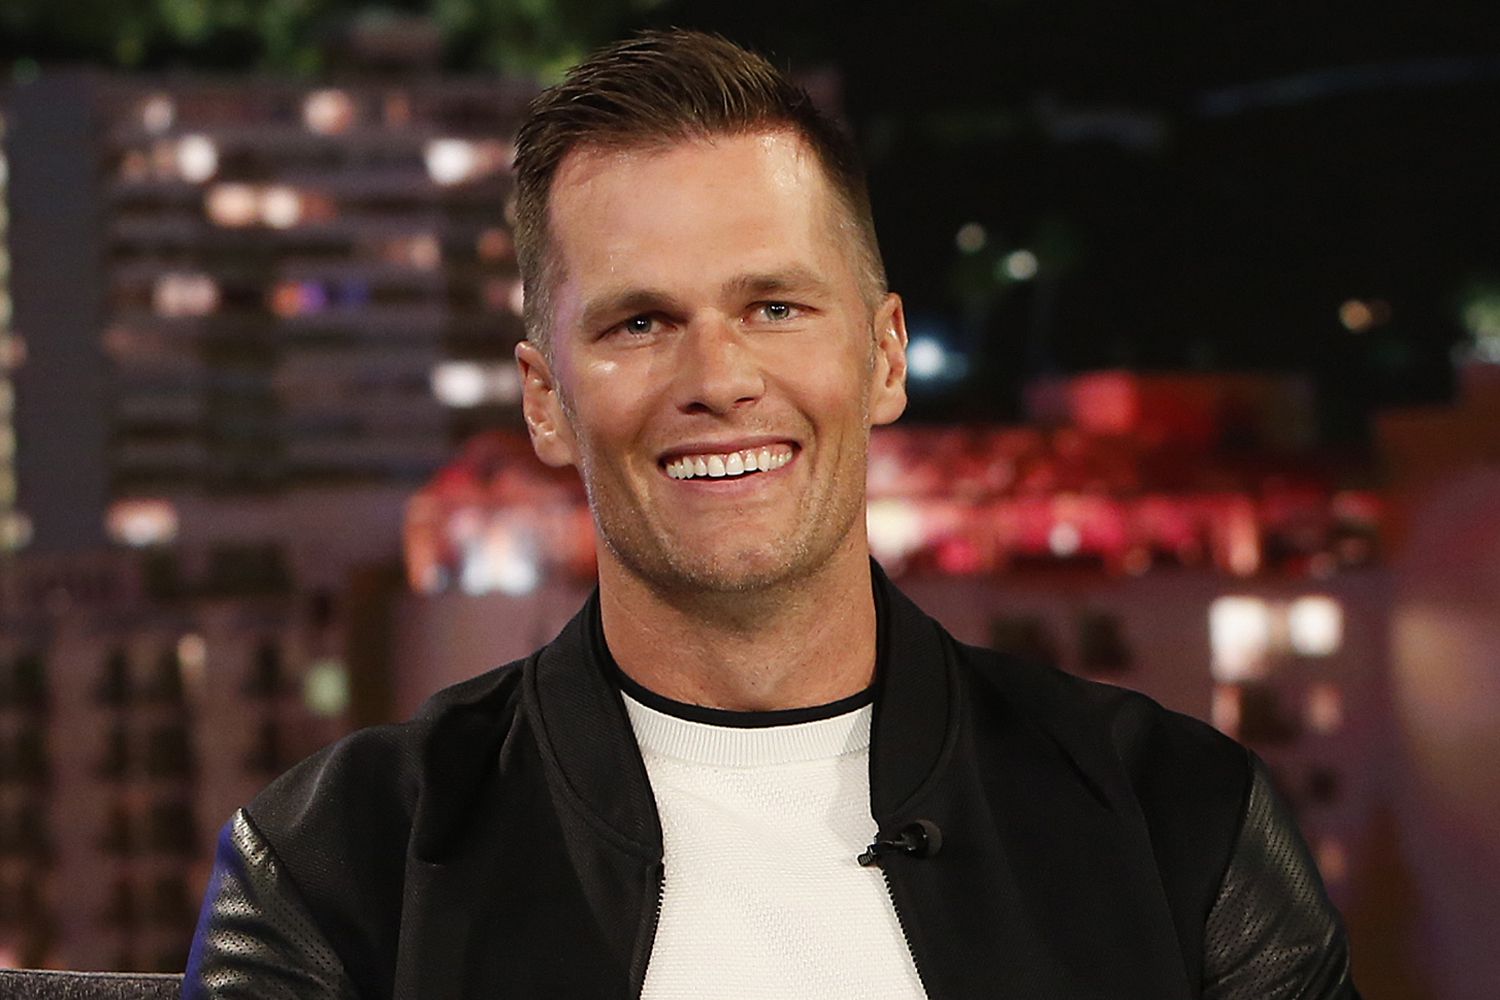 Tom Brady's New Game Plan From NFL Star to Fox's Lead Announcer.